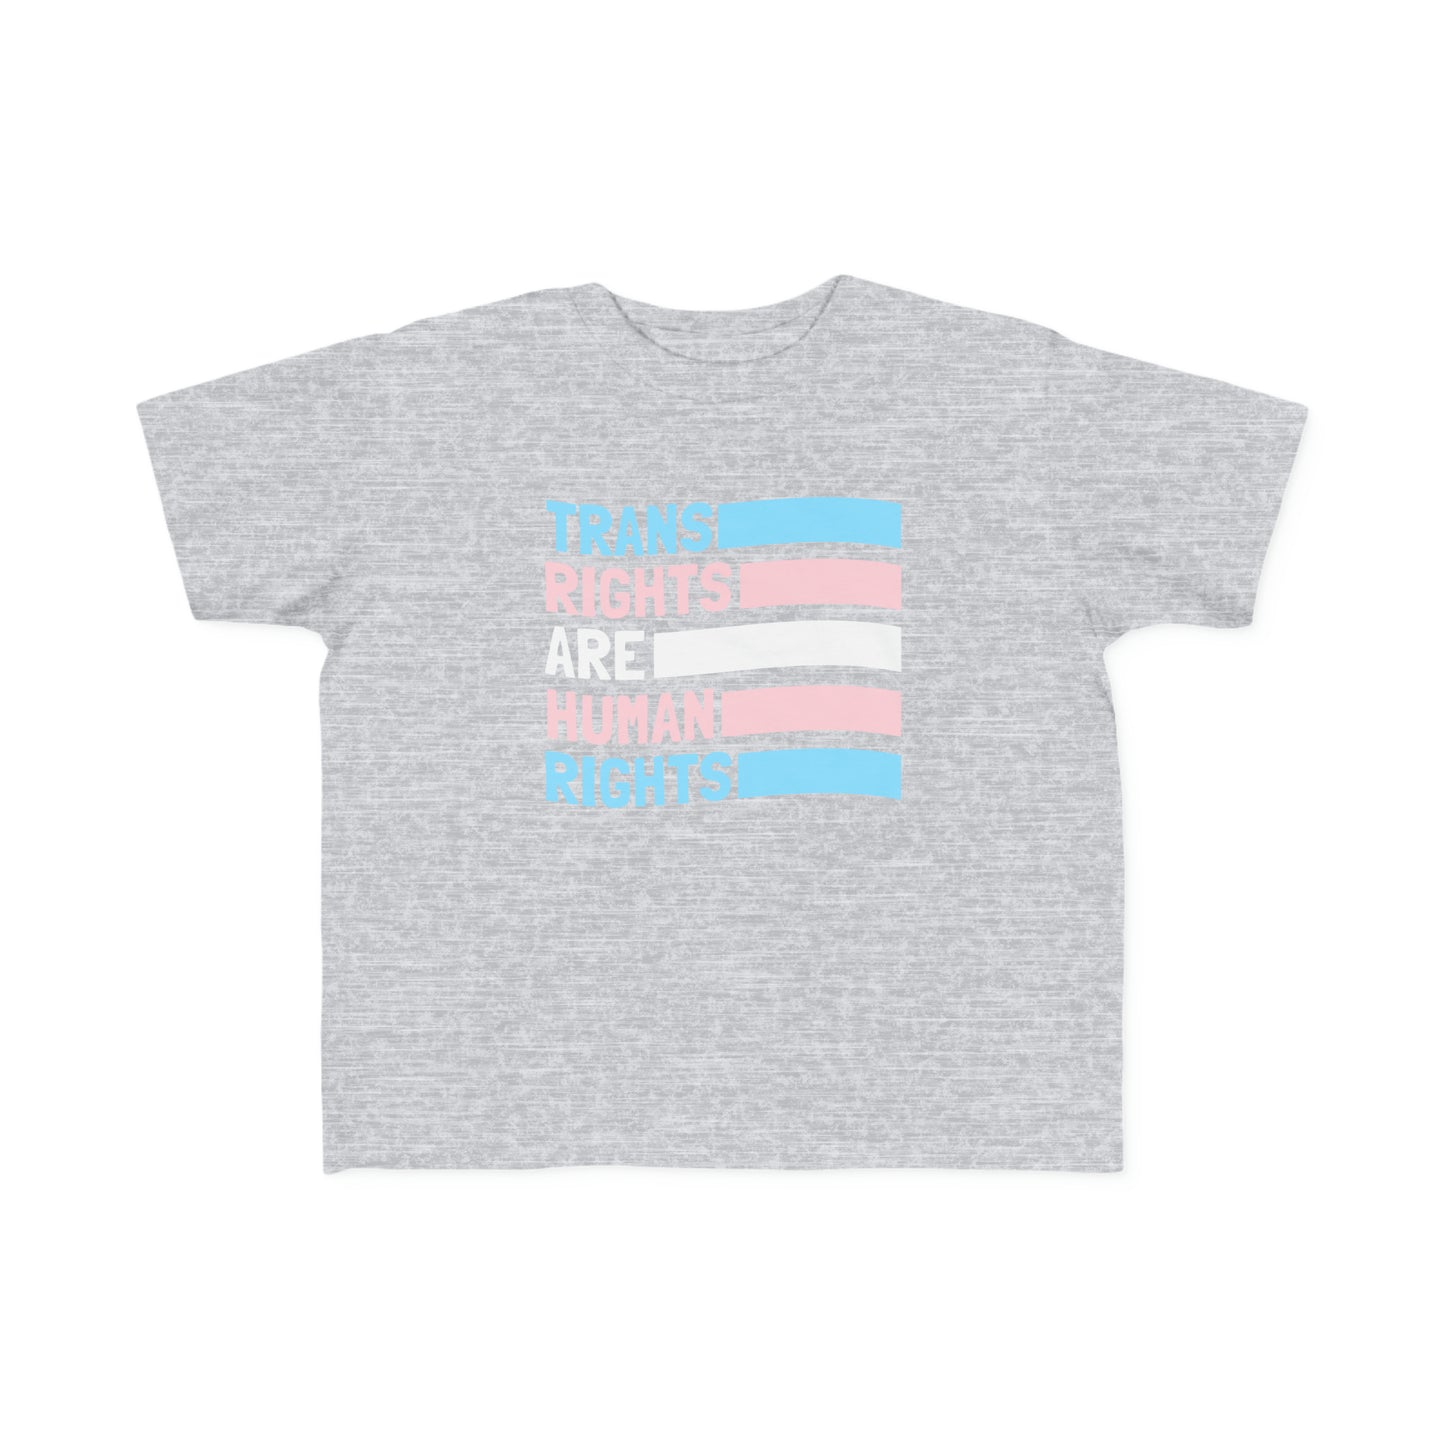 “Trans Rights Are Human Rights” Toddler's Tee